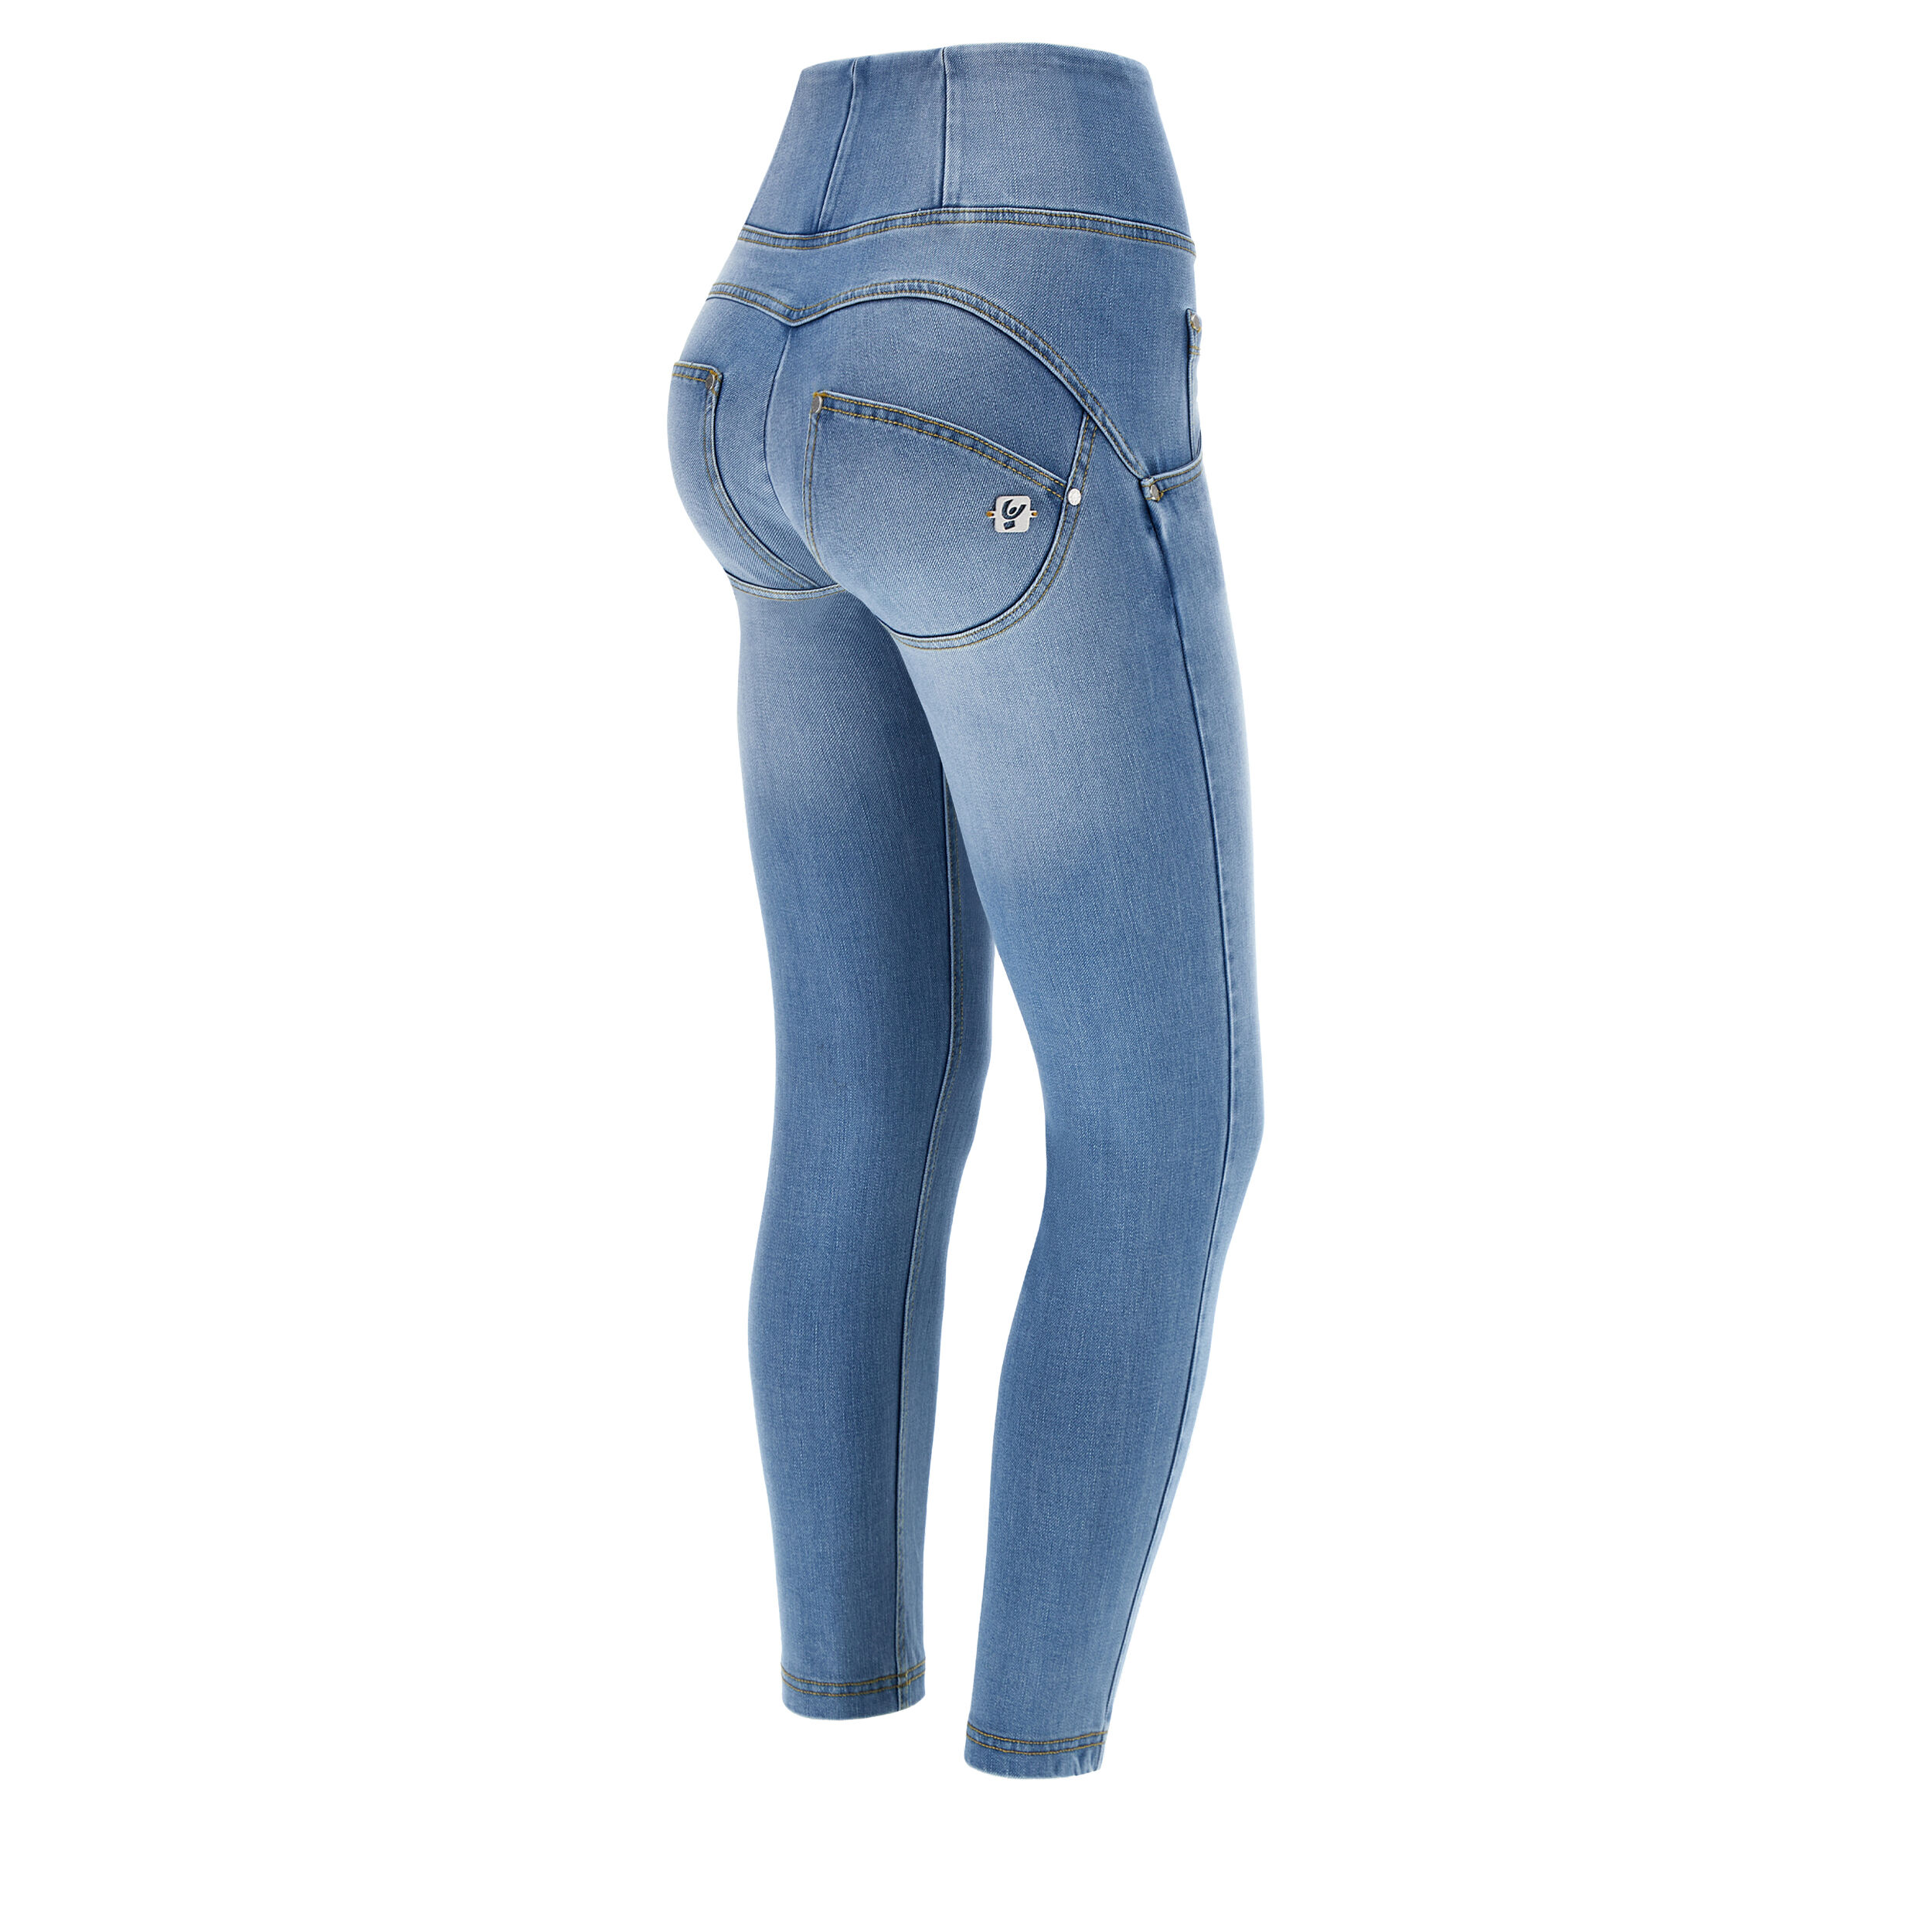 Freddy Jeans push up WR.UP® 7/8 superskinny effetto used vita alta Jeans Chiaro-Cuciture Gialle Donna Small